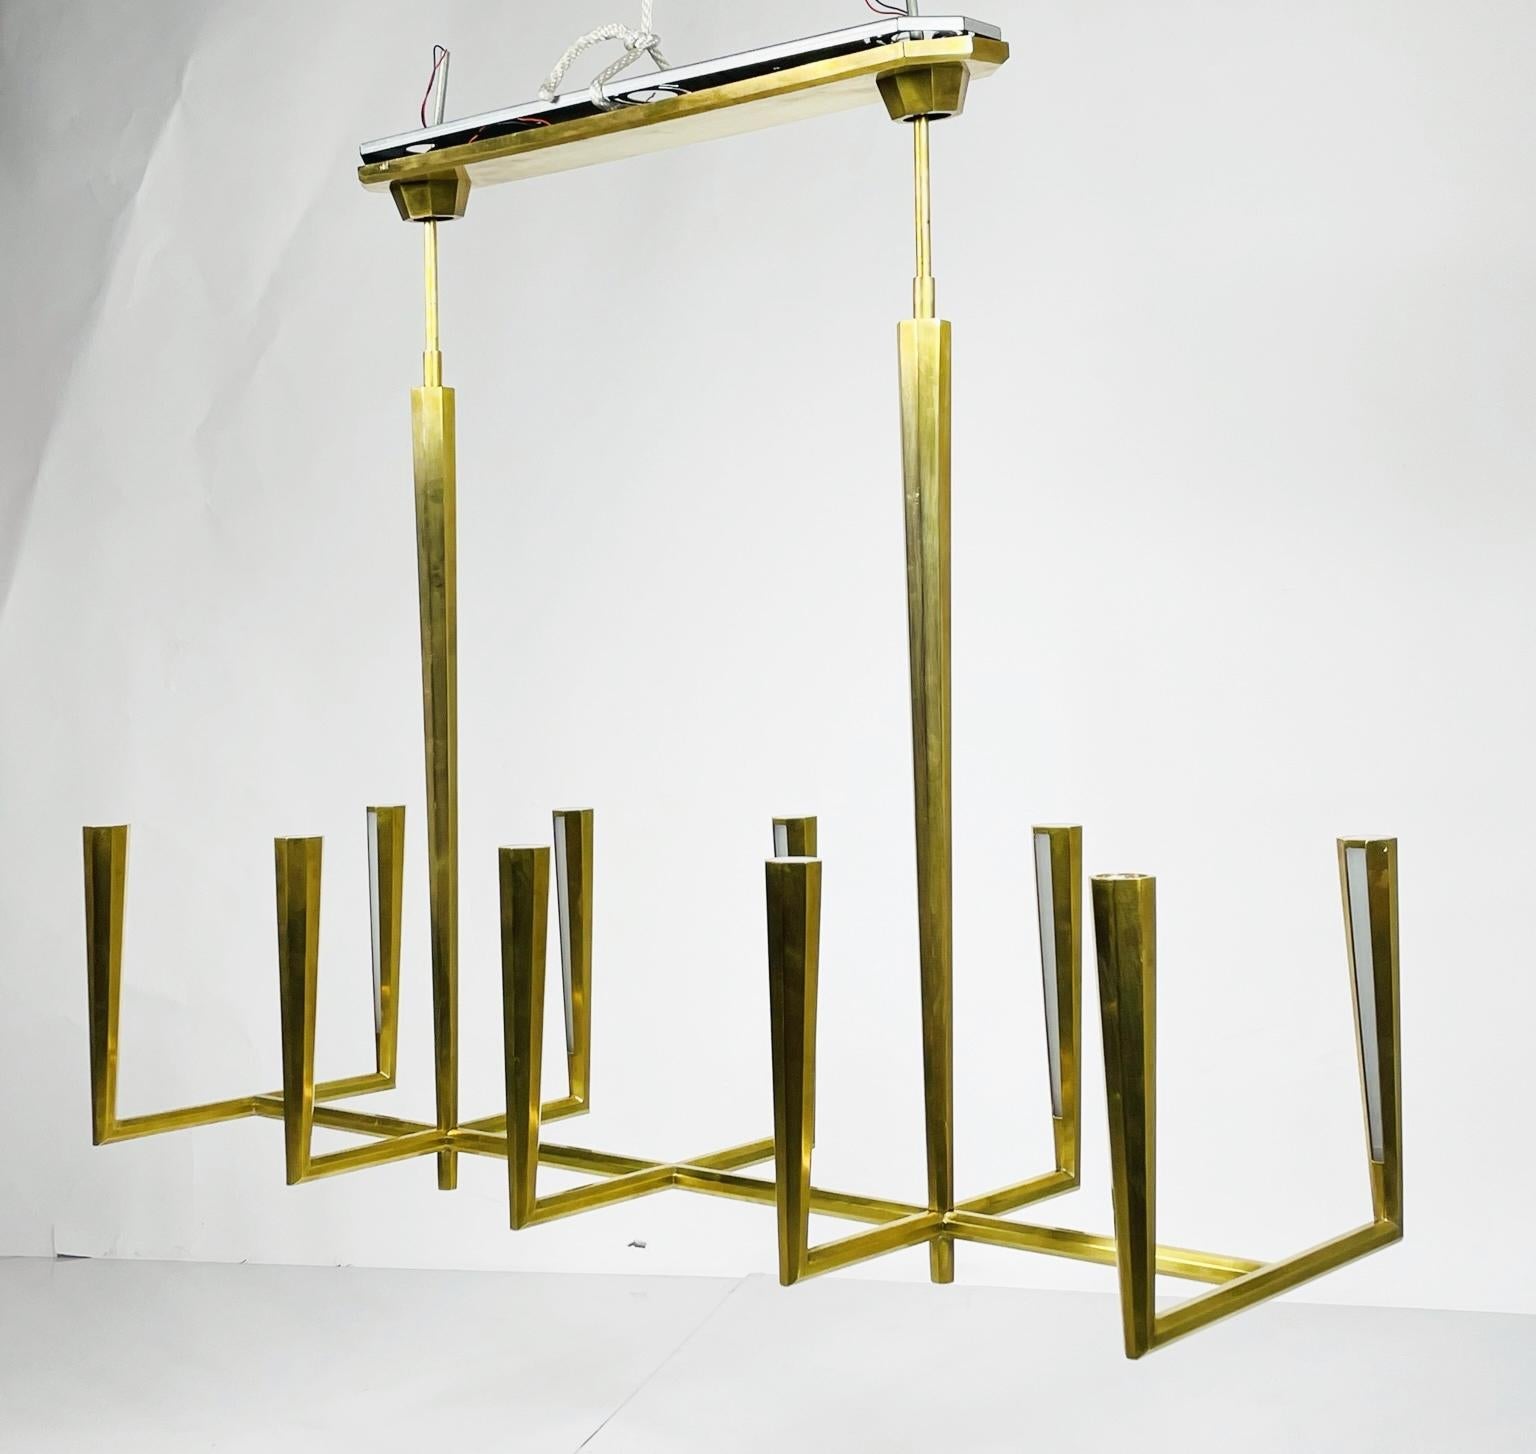 Eye-catching sleek metal lines define the Galahad by Thomas O'Brien. The minimalist aesthetic is at once modern and timeless.
Crafted from solid sculpted and welded brass, the refined fixtures will add a soft glow to rooms.

Measurements:
39.50